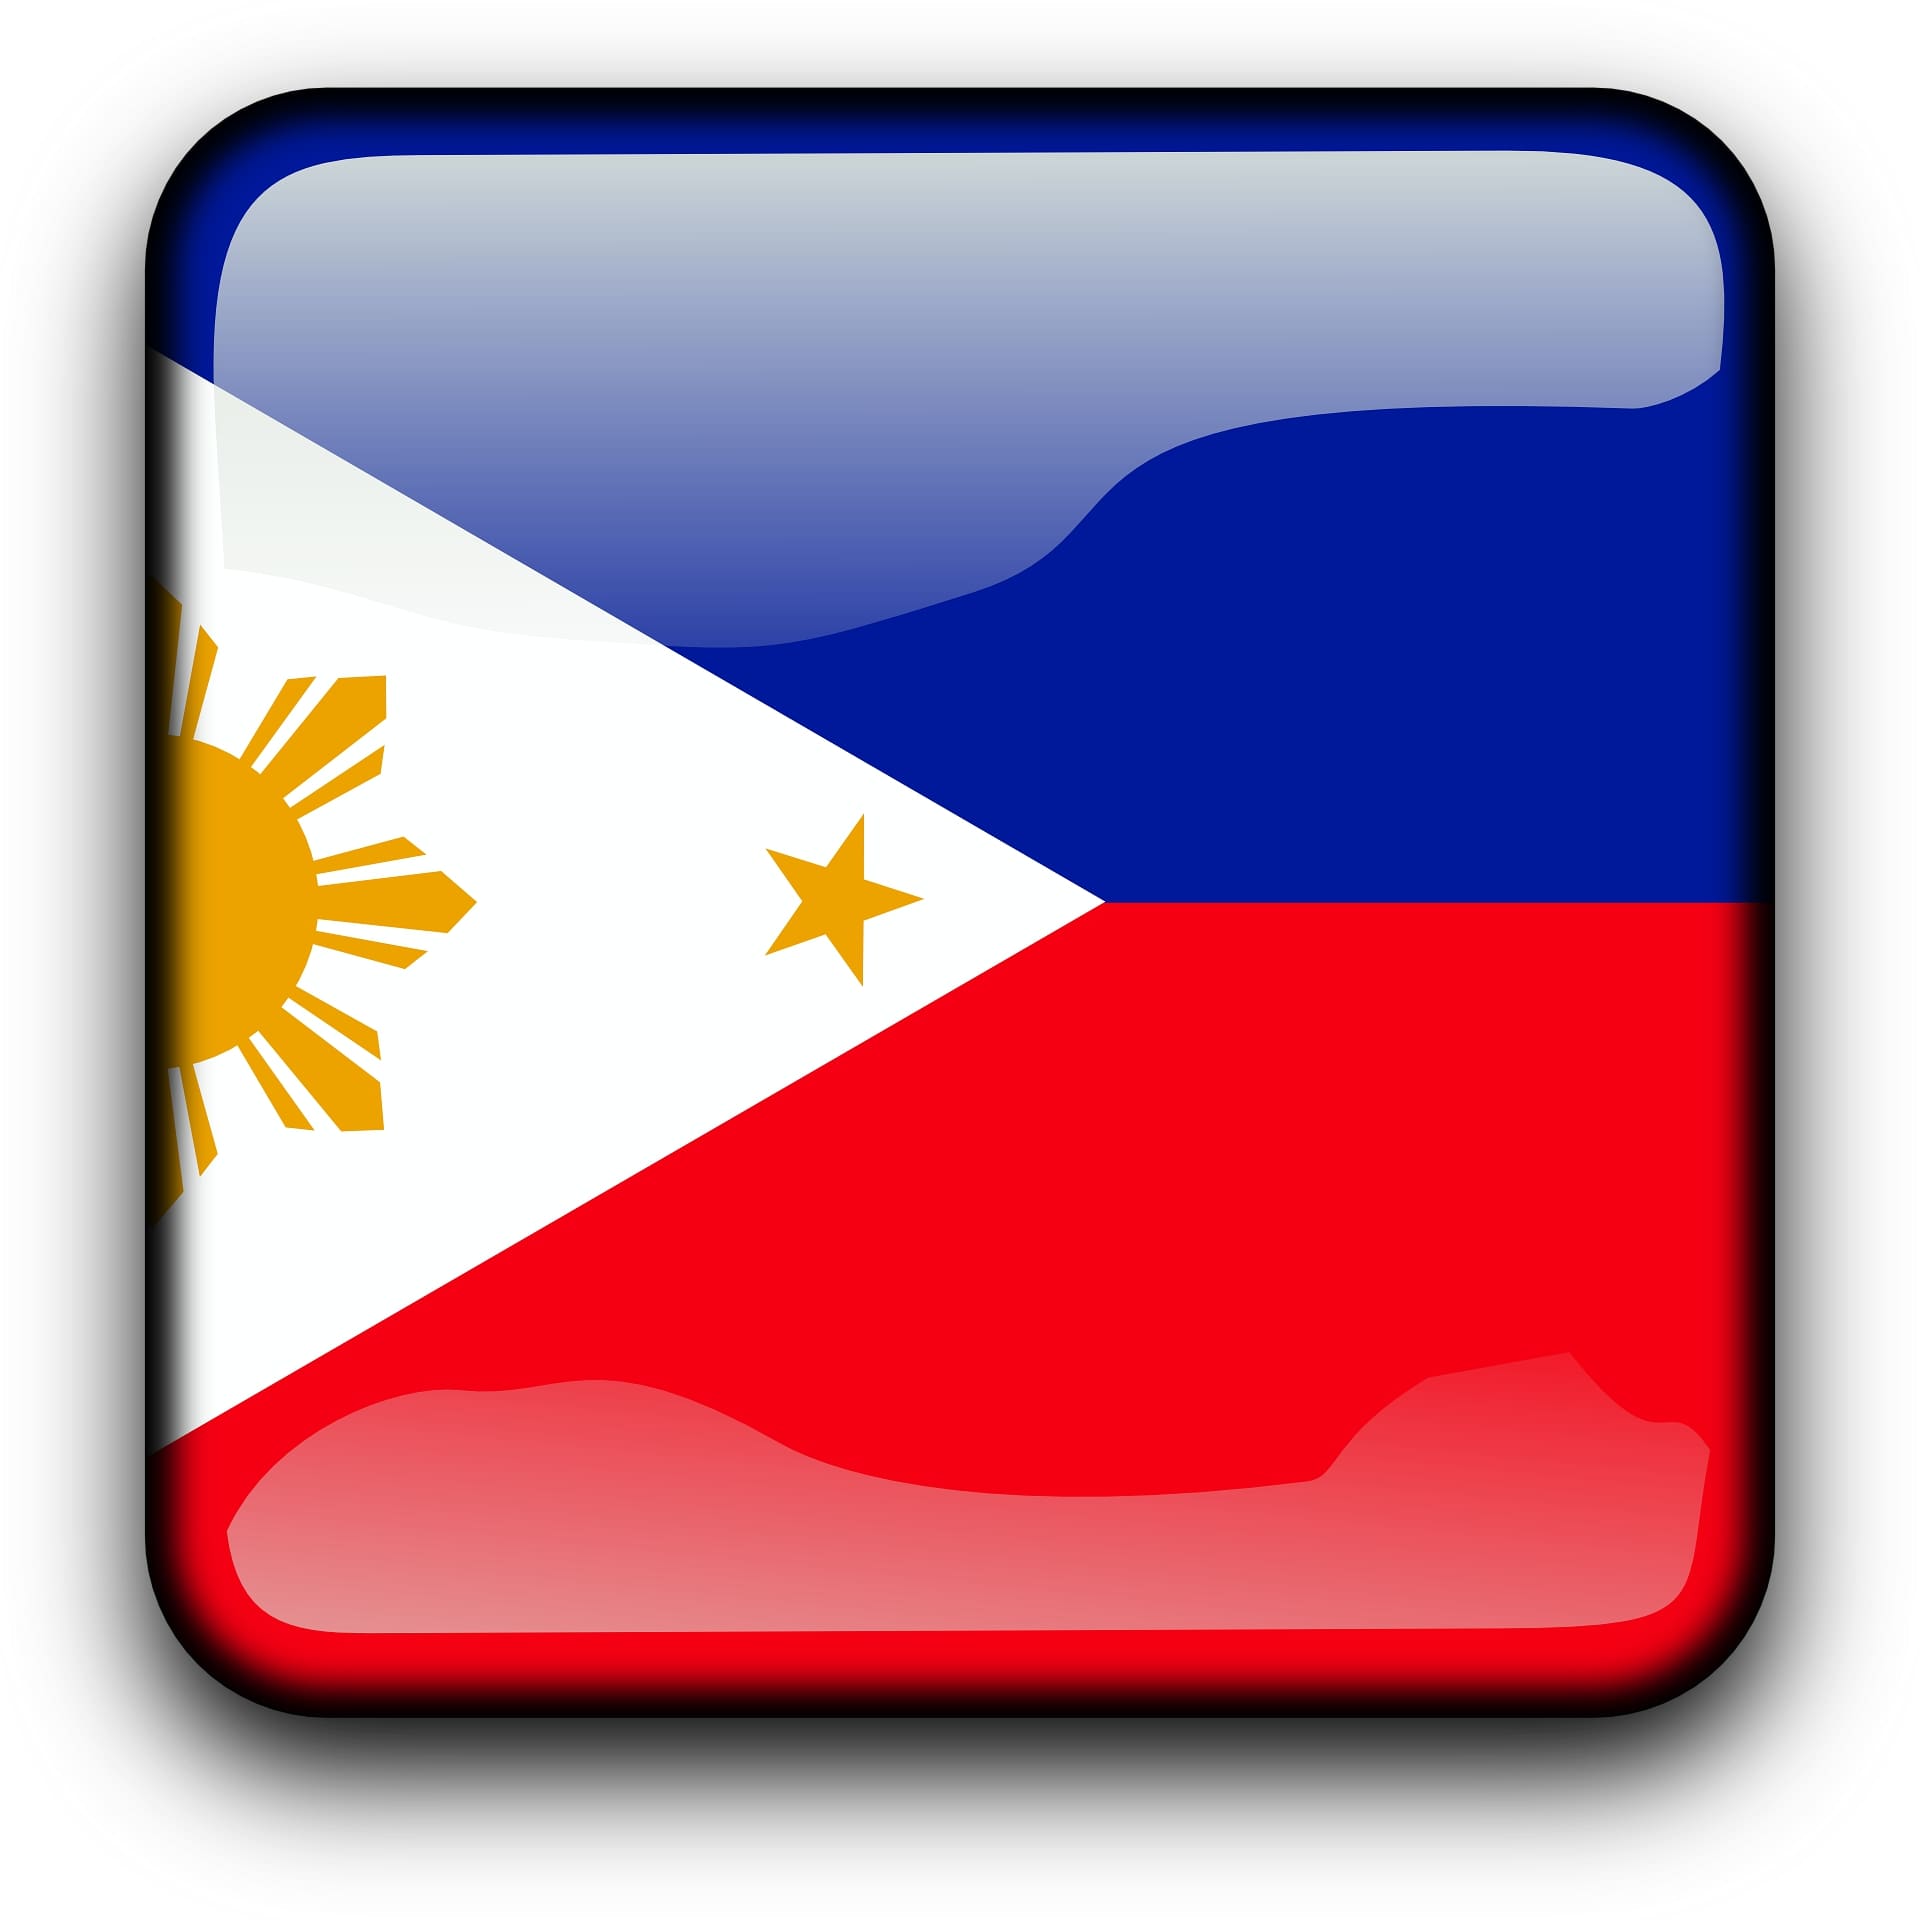 Illustration of the philippinesflag